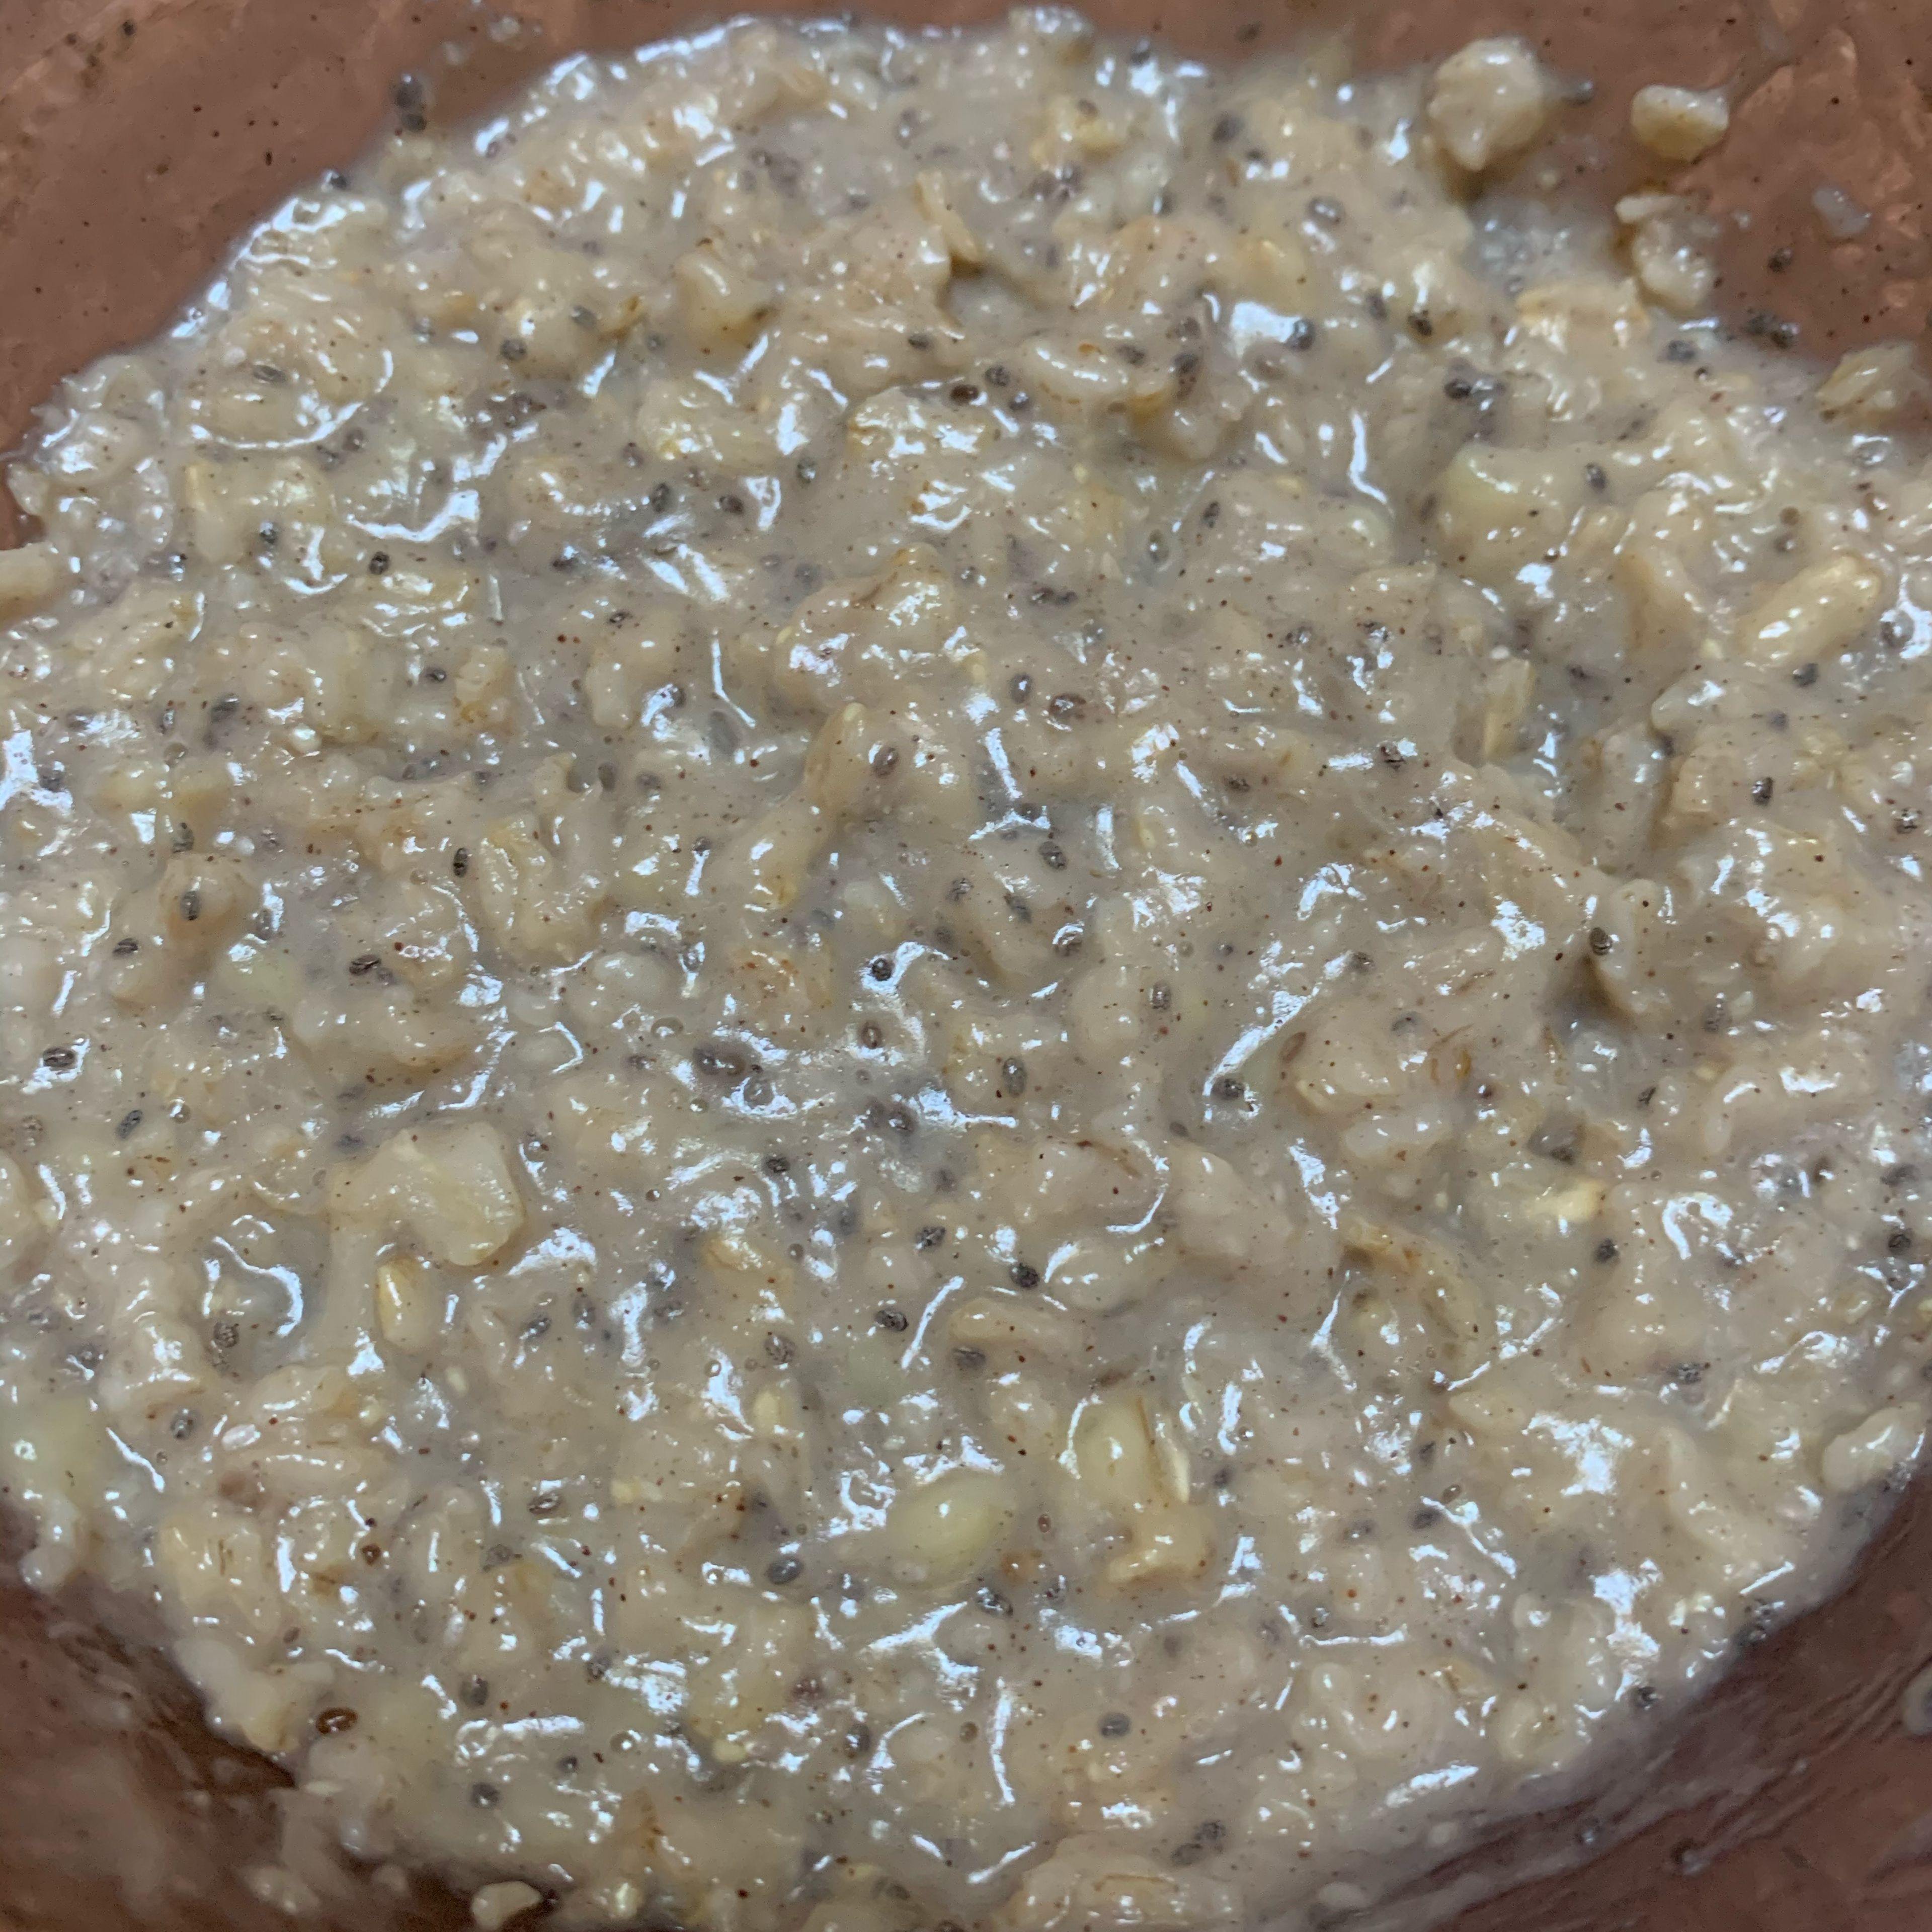 Add chia seeds, stir to combine, and add oat mixture to a container